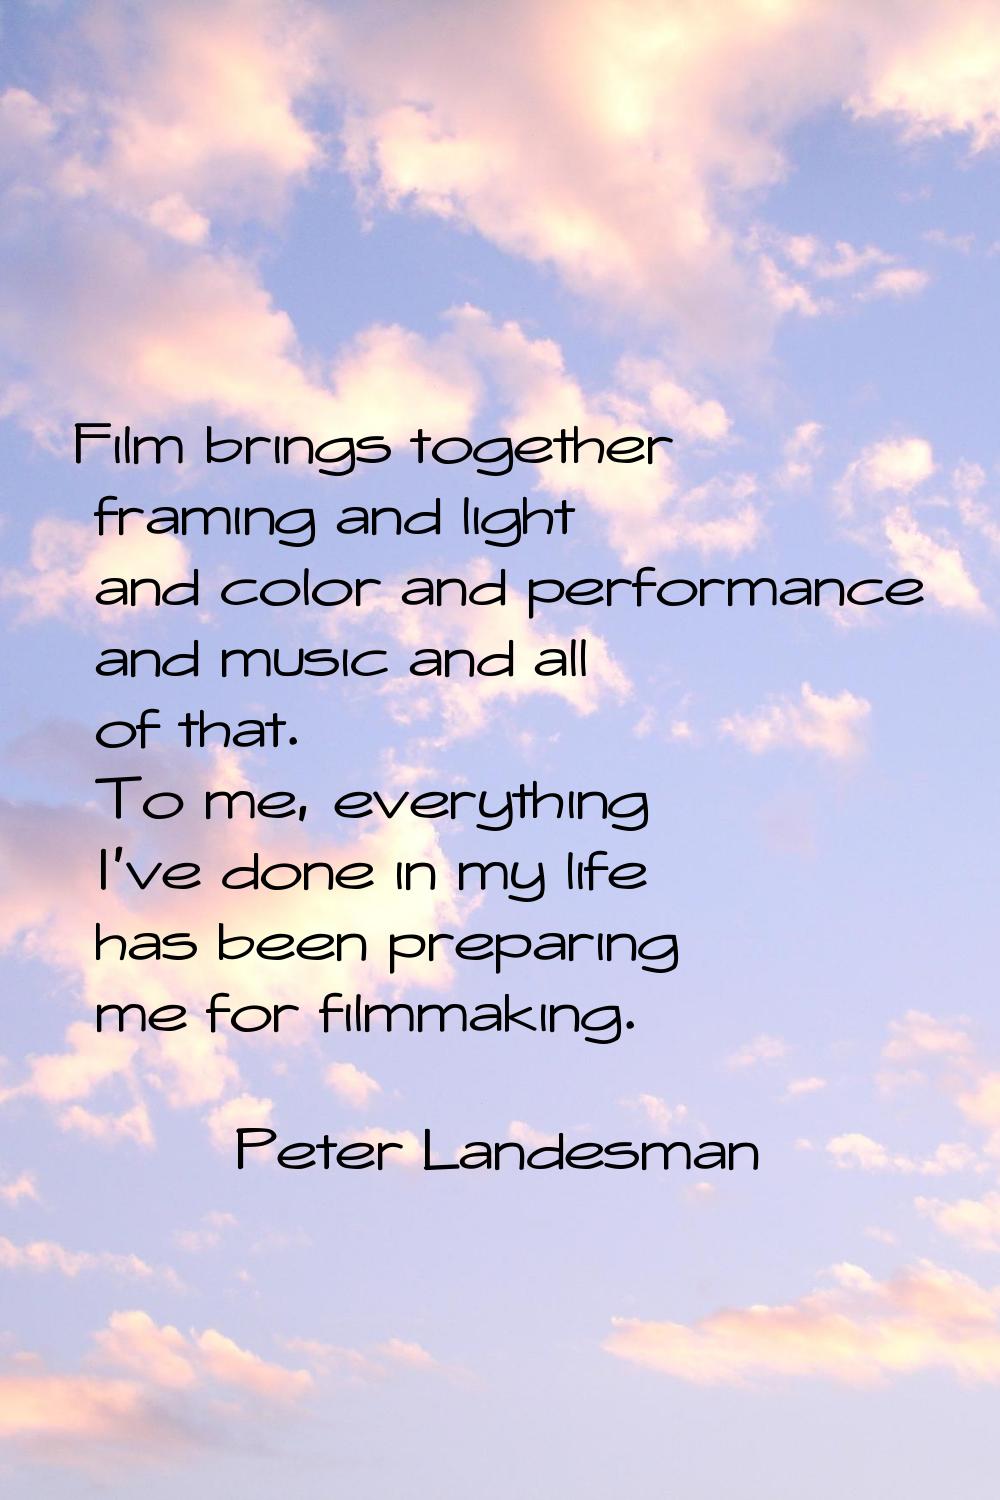 Film brings together framing and light and color and performance and music and all of that. To me, 